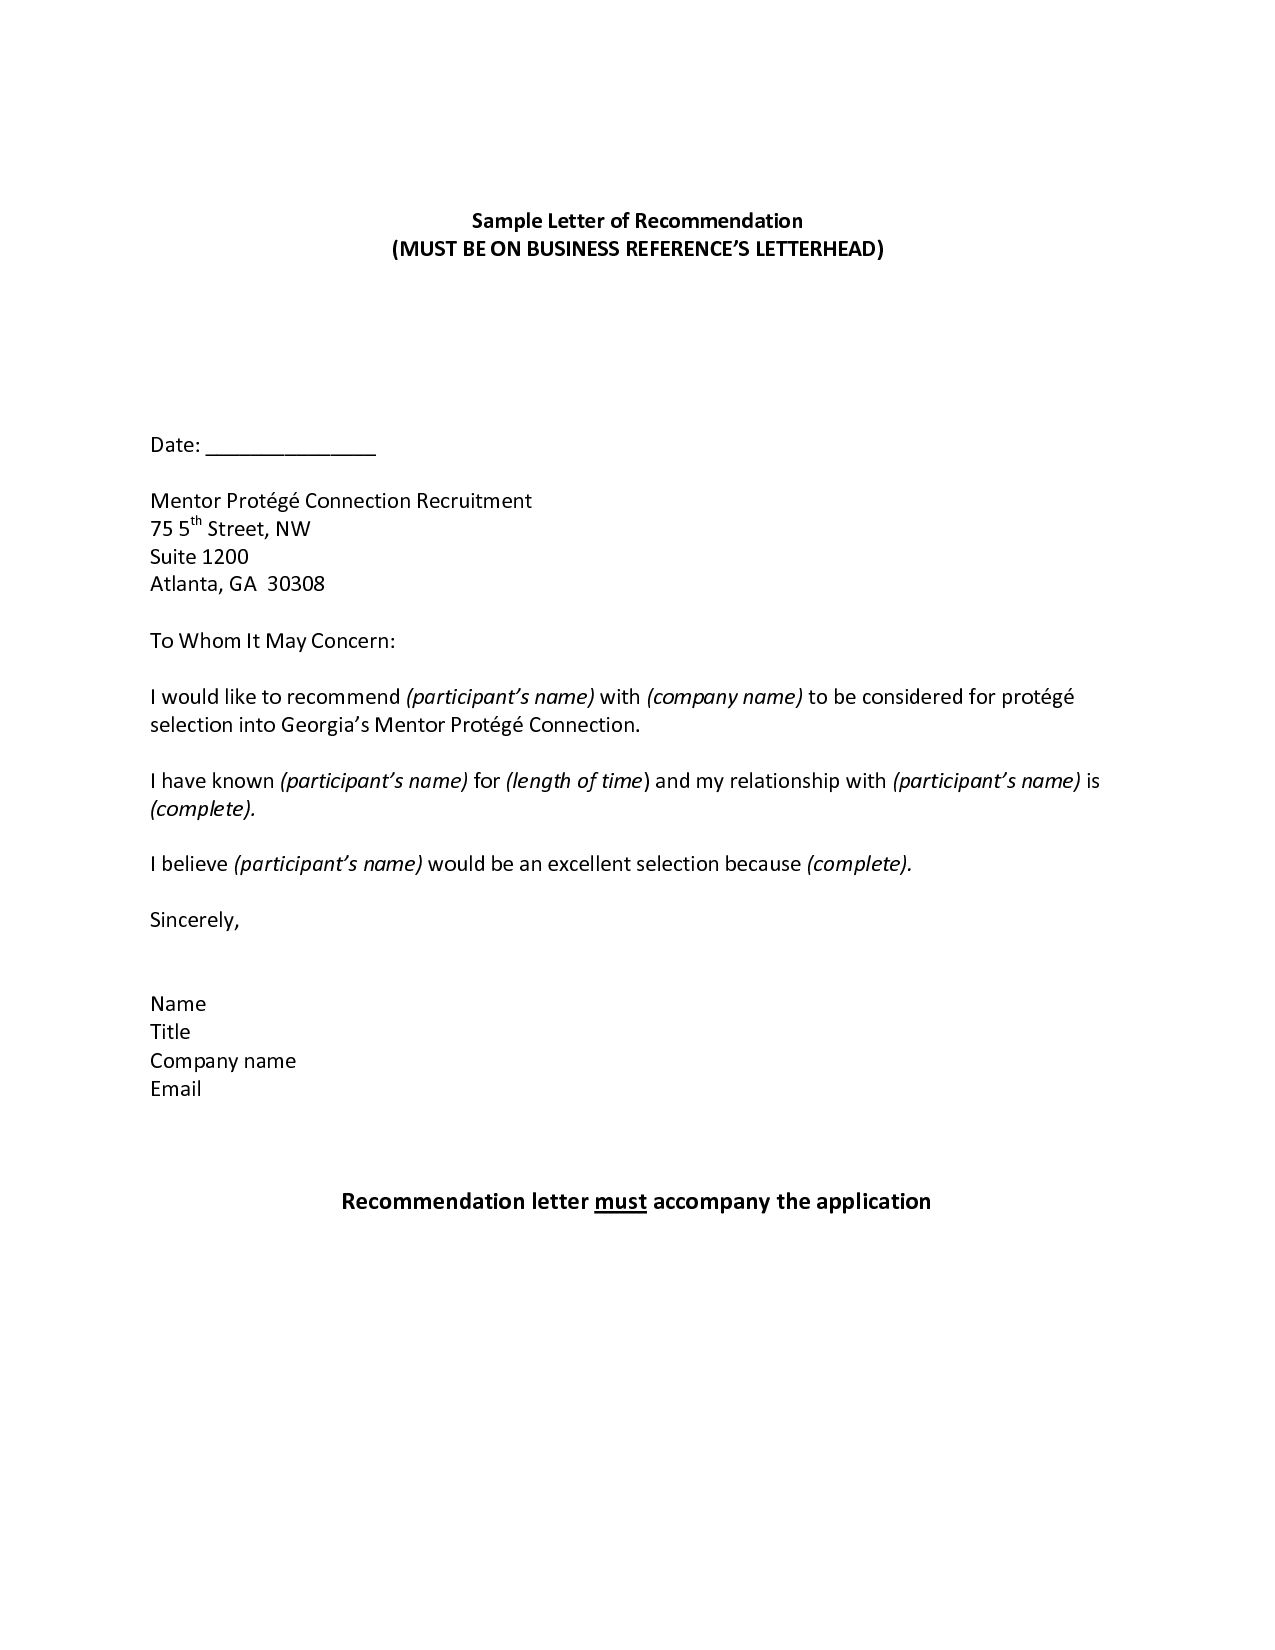 Professional Reference Sample Recommendation Letter Jos intended for size 1275 X 1650